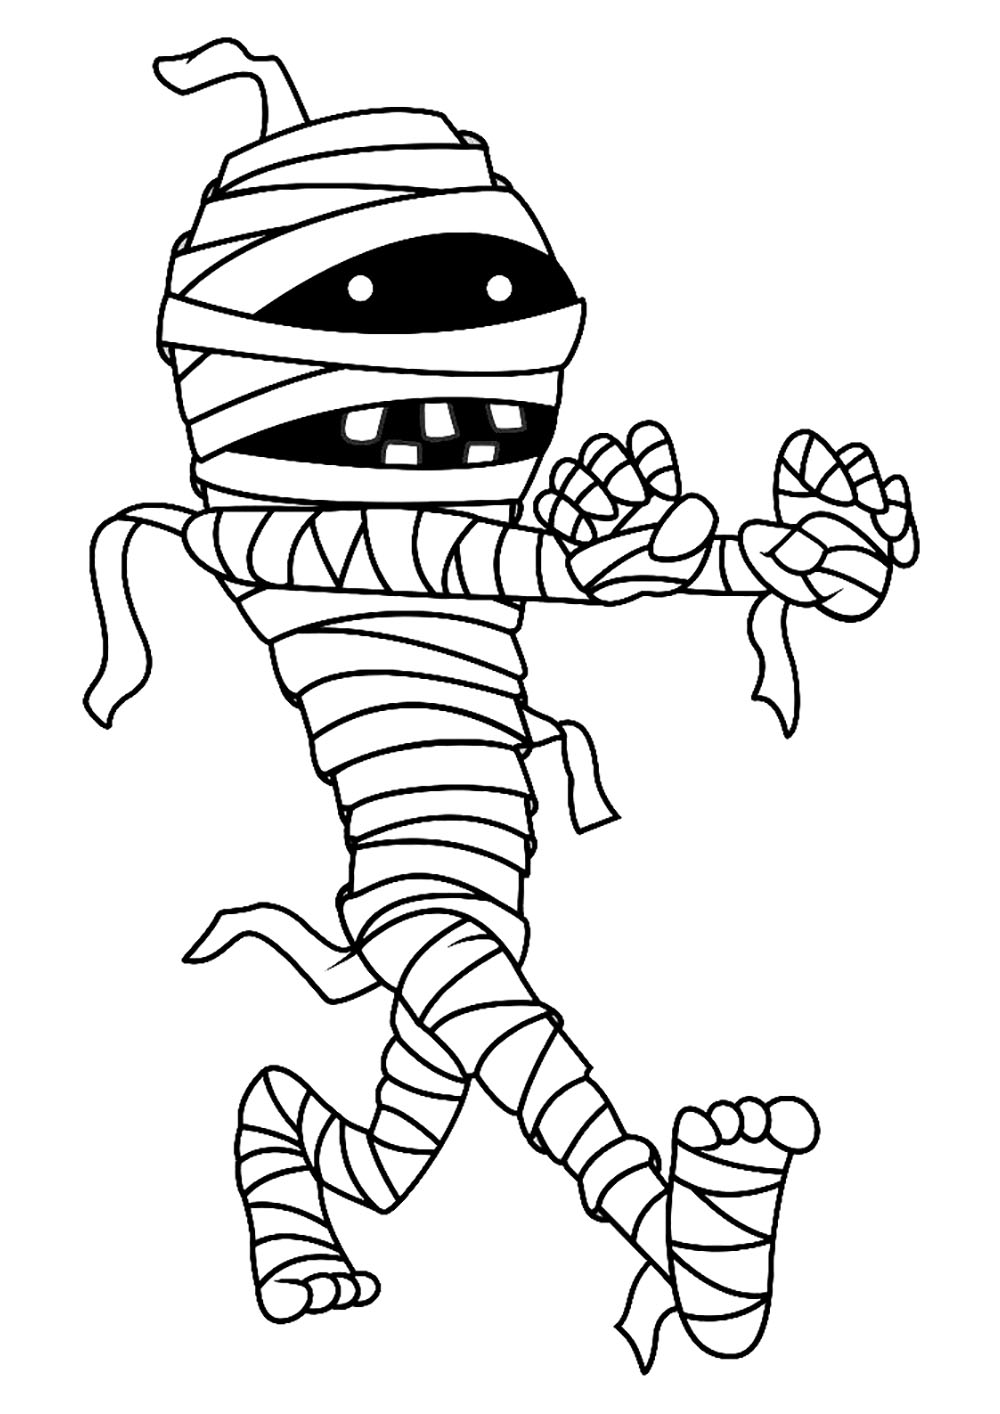 mummy-halloween-kids-coloring-pages